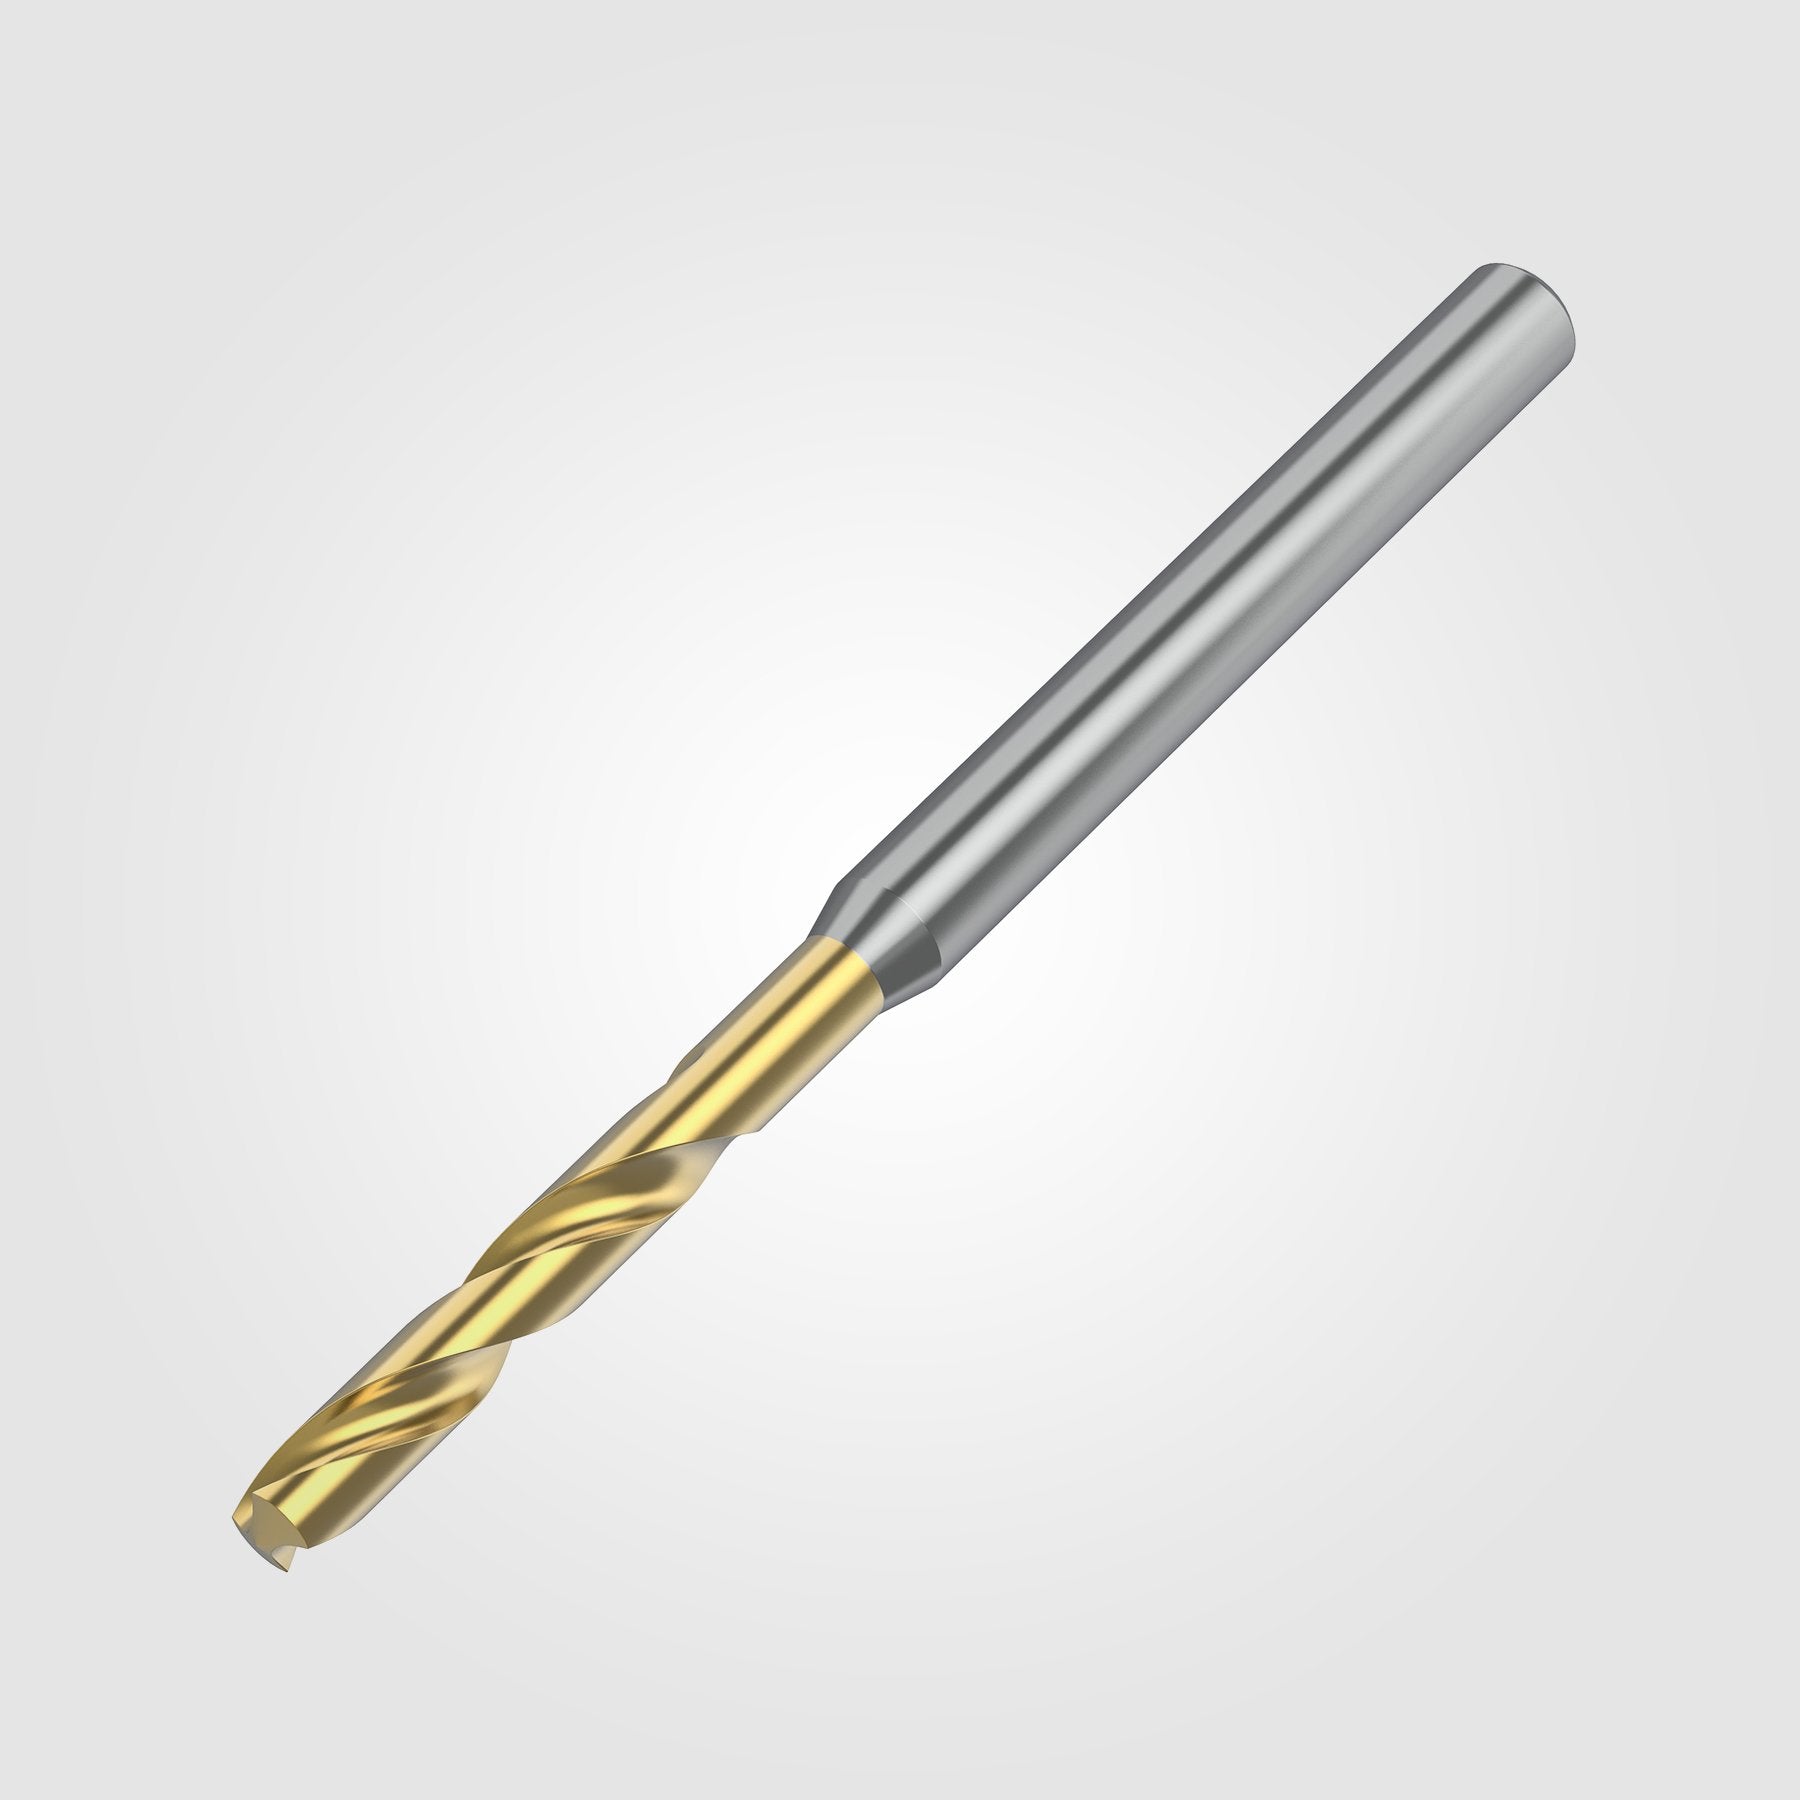 GOdrill (THROUGH COOLANT) | 11.908mm / .4688" / 3xD | SOLID CARBIDE DRILL | 4151228